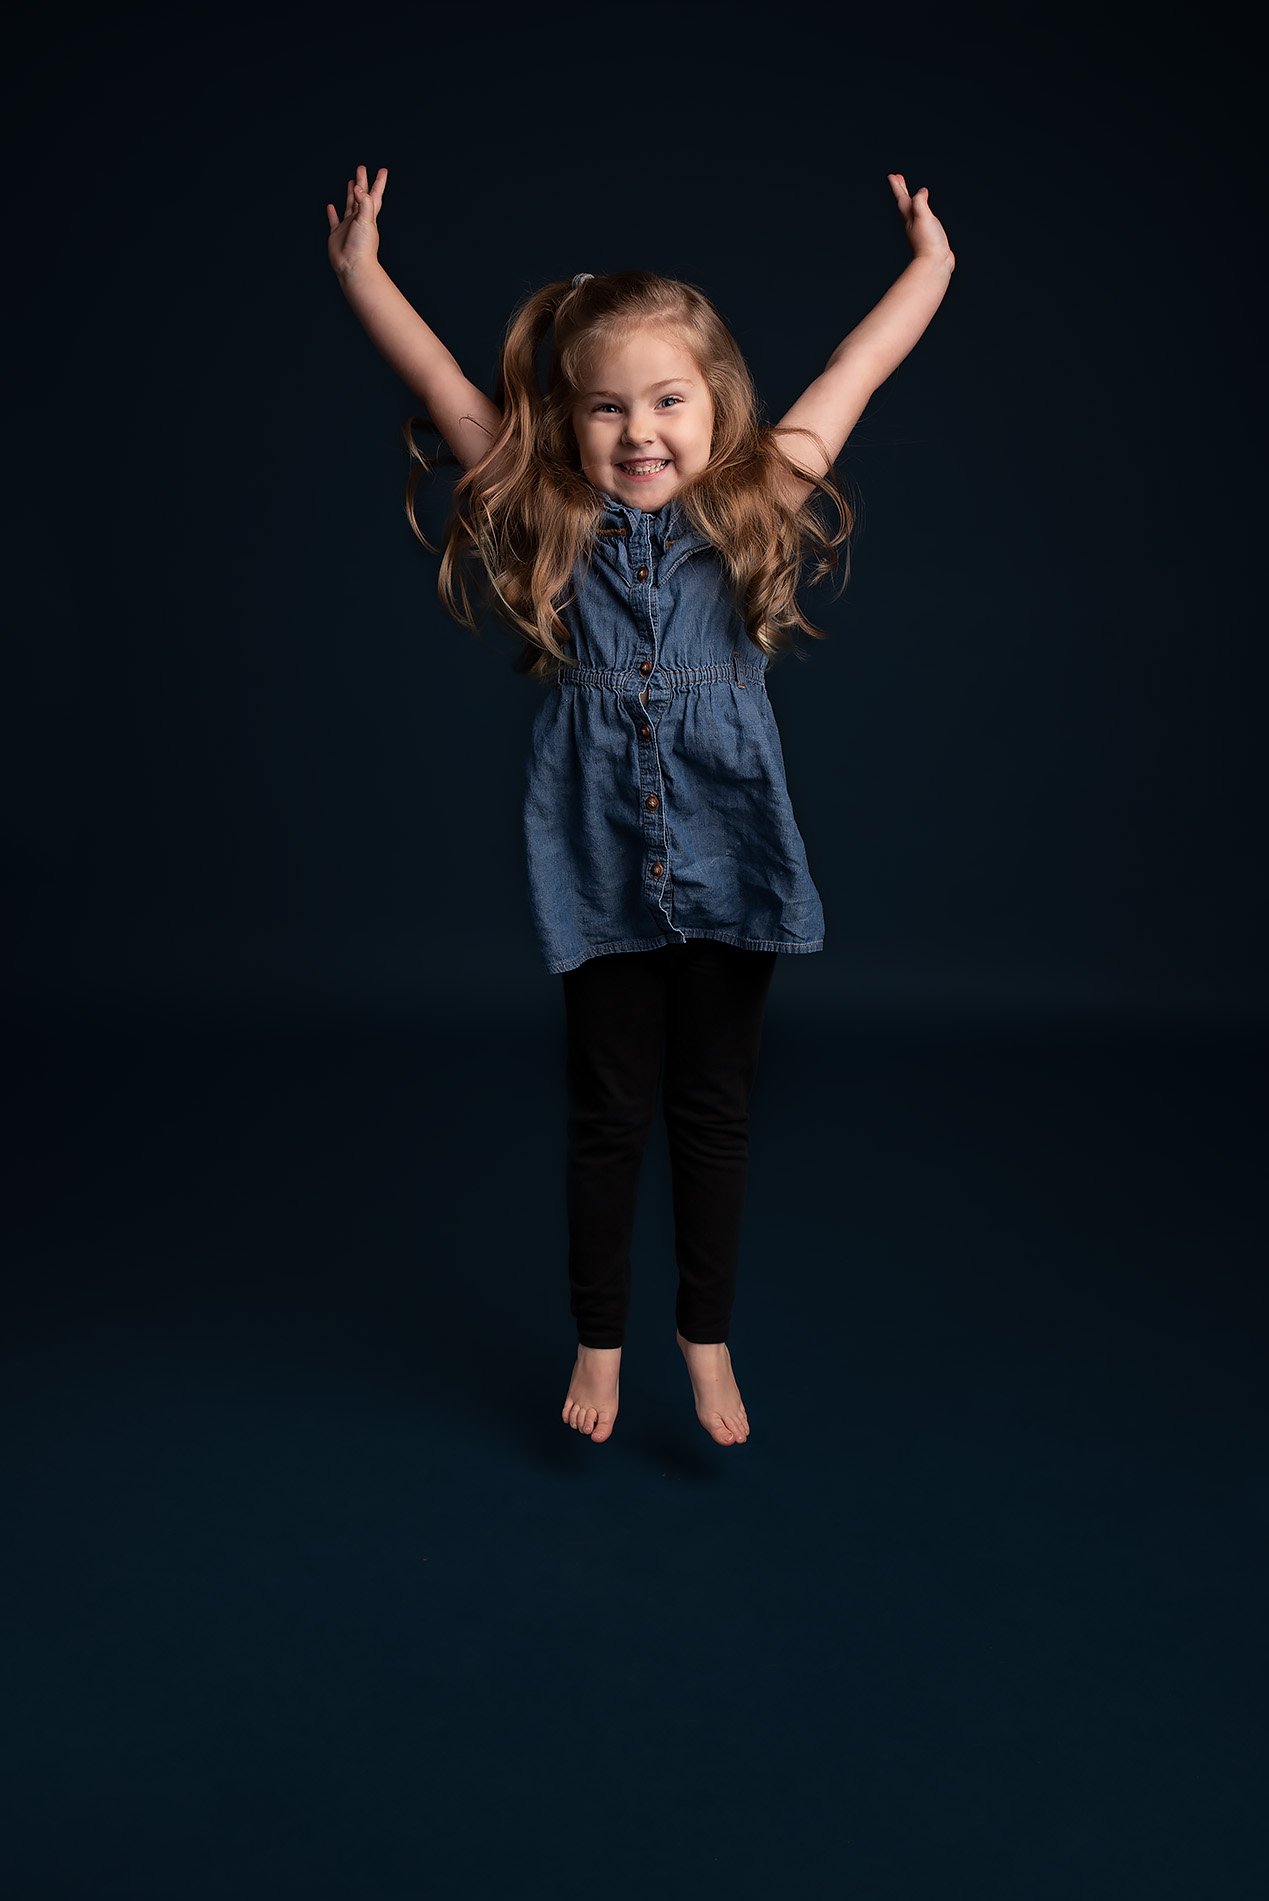 preschooler-jumping-with-arms-above-head.jpg